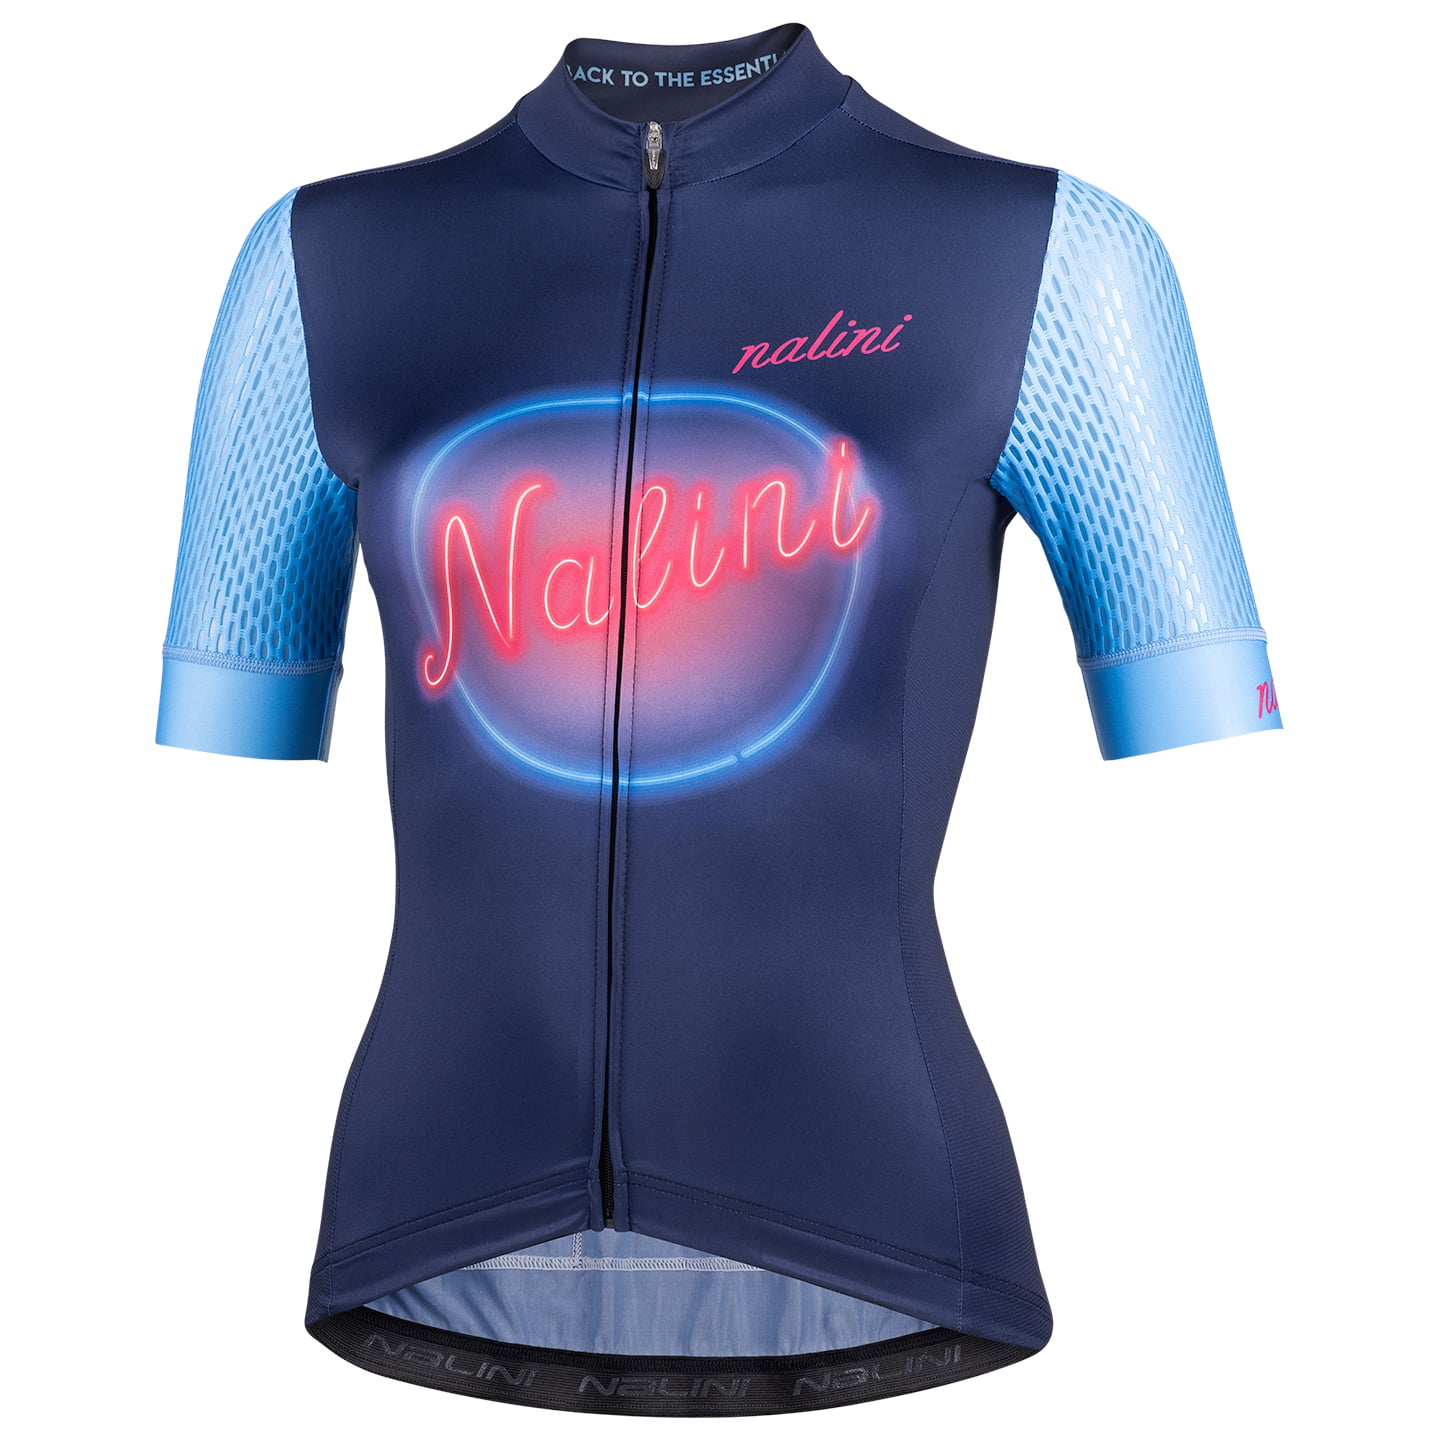 NALINI Hollywood Women’s Short Sleeve Jersey, size M, Cycling jersey, Cycle clothing